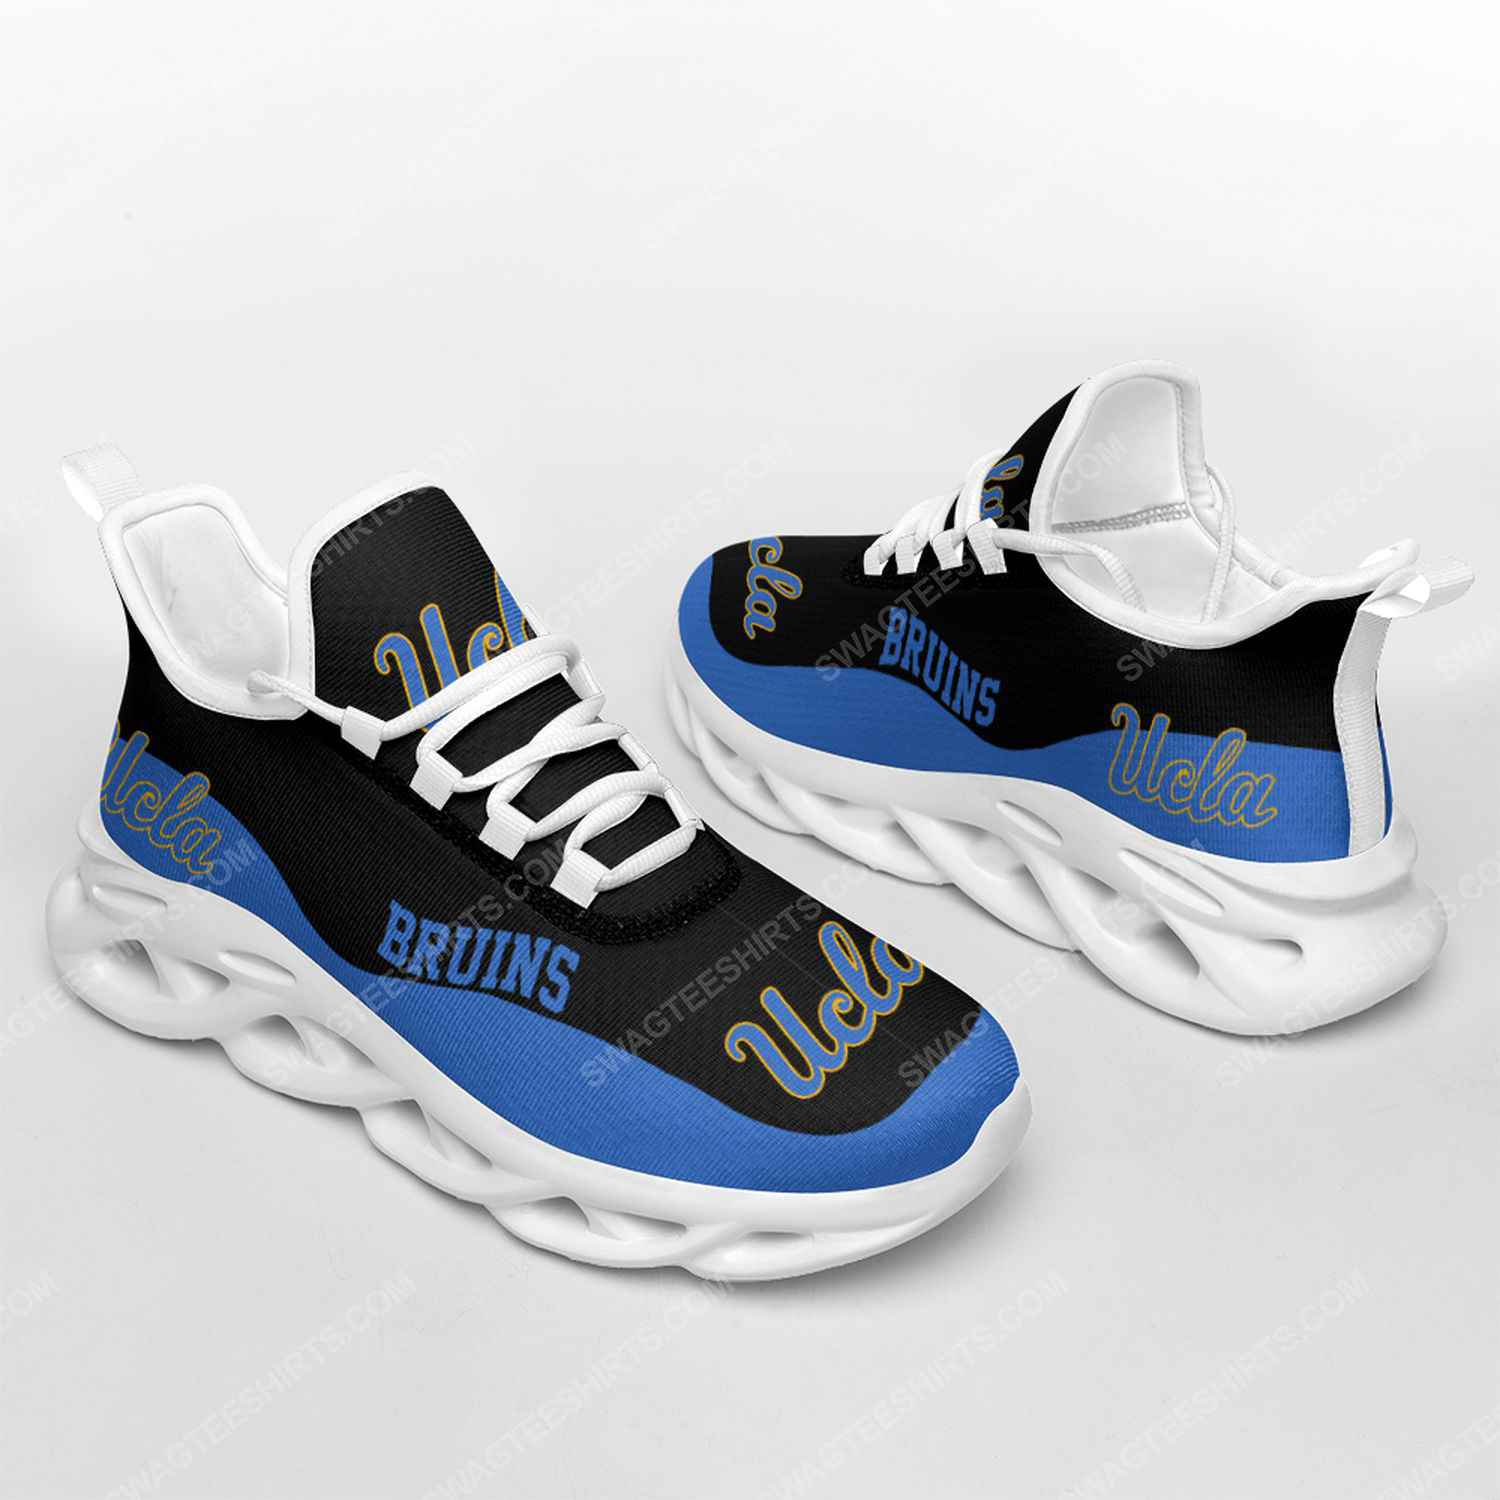 The ucla bruins football team max soul shoes 2